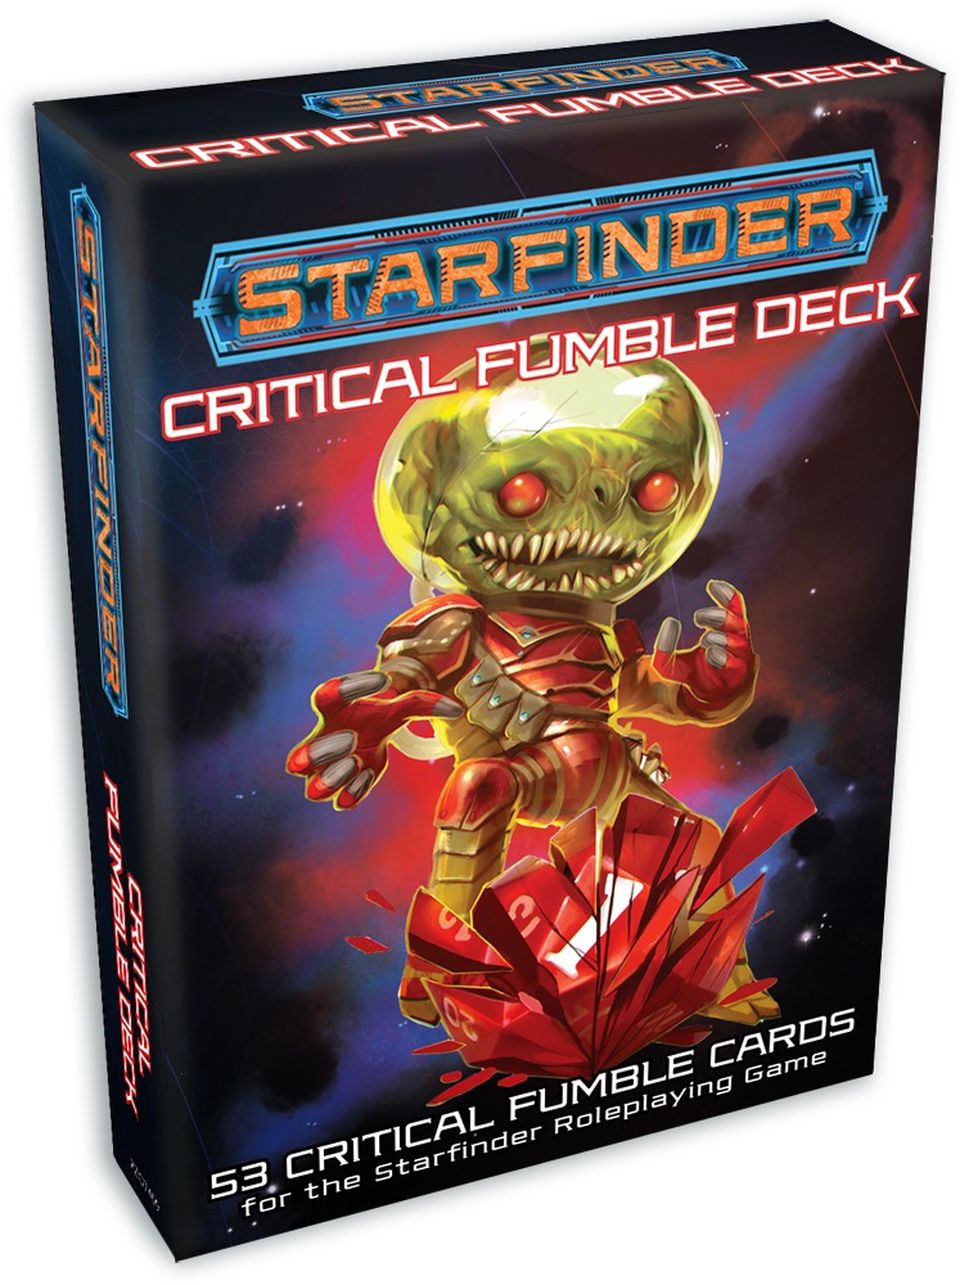 Starfinder: Critical Fumble Deck VO image